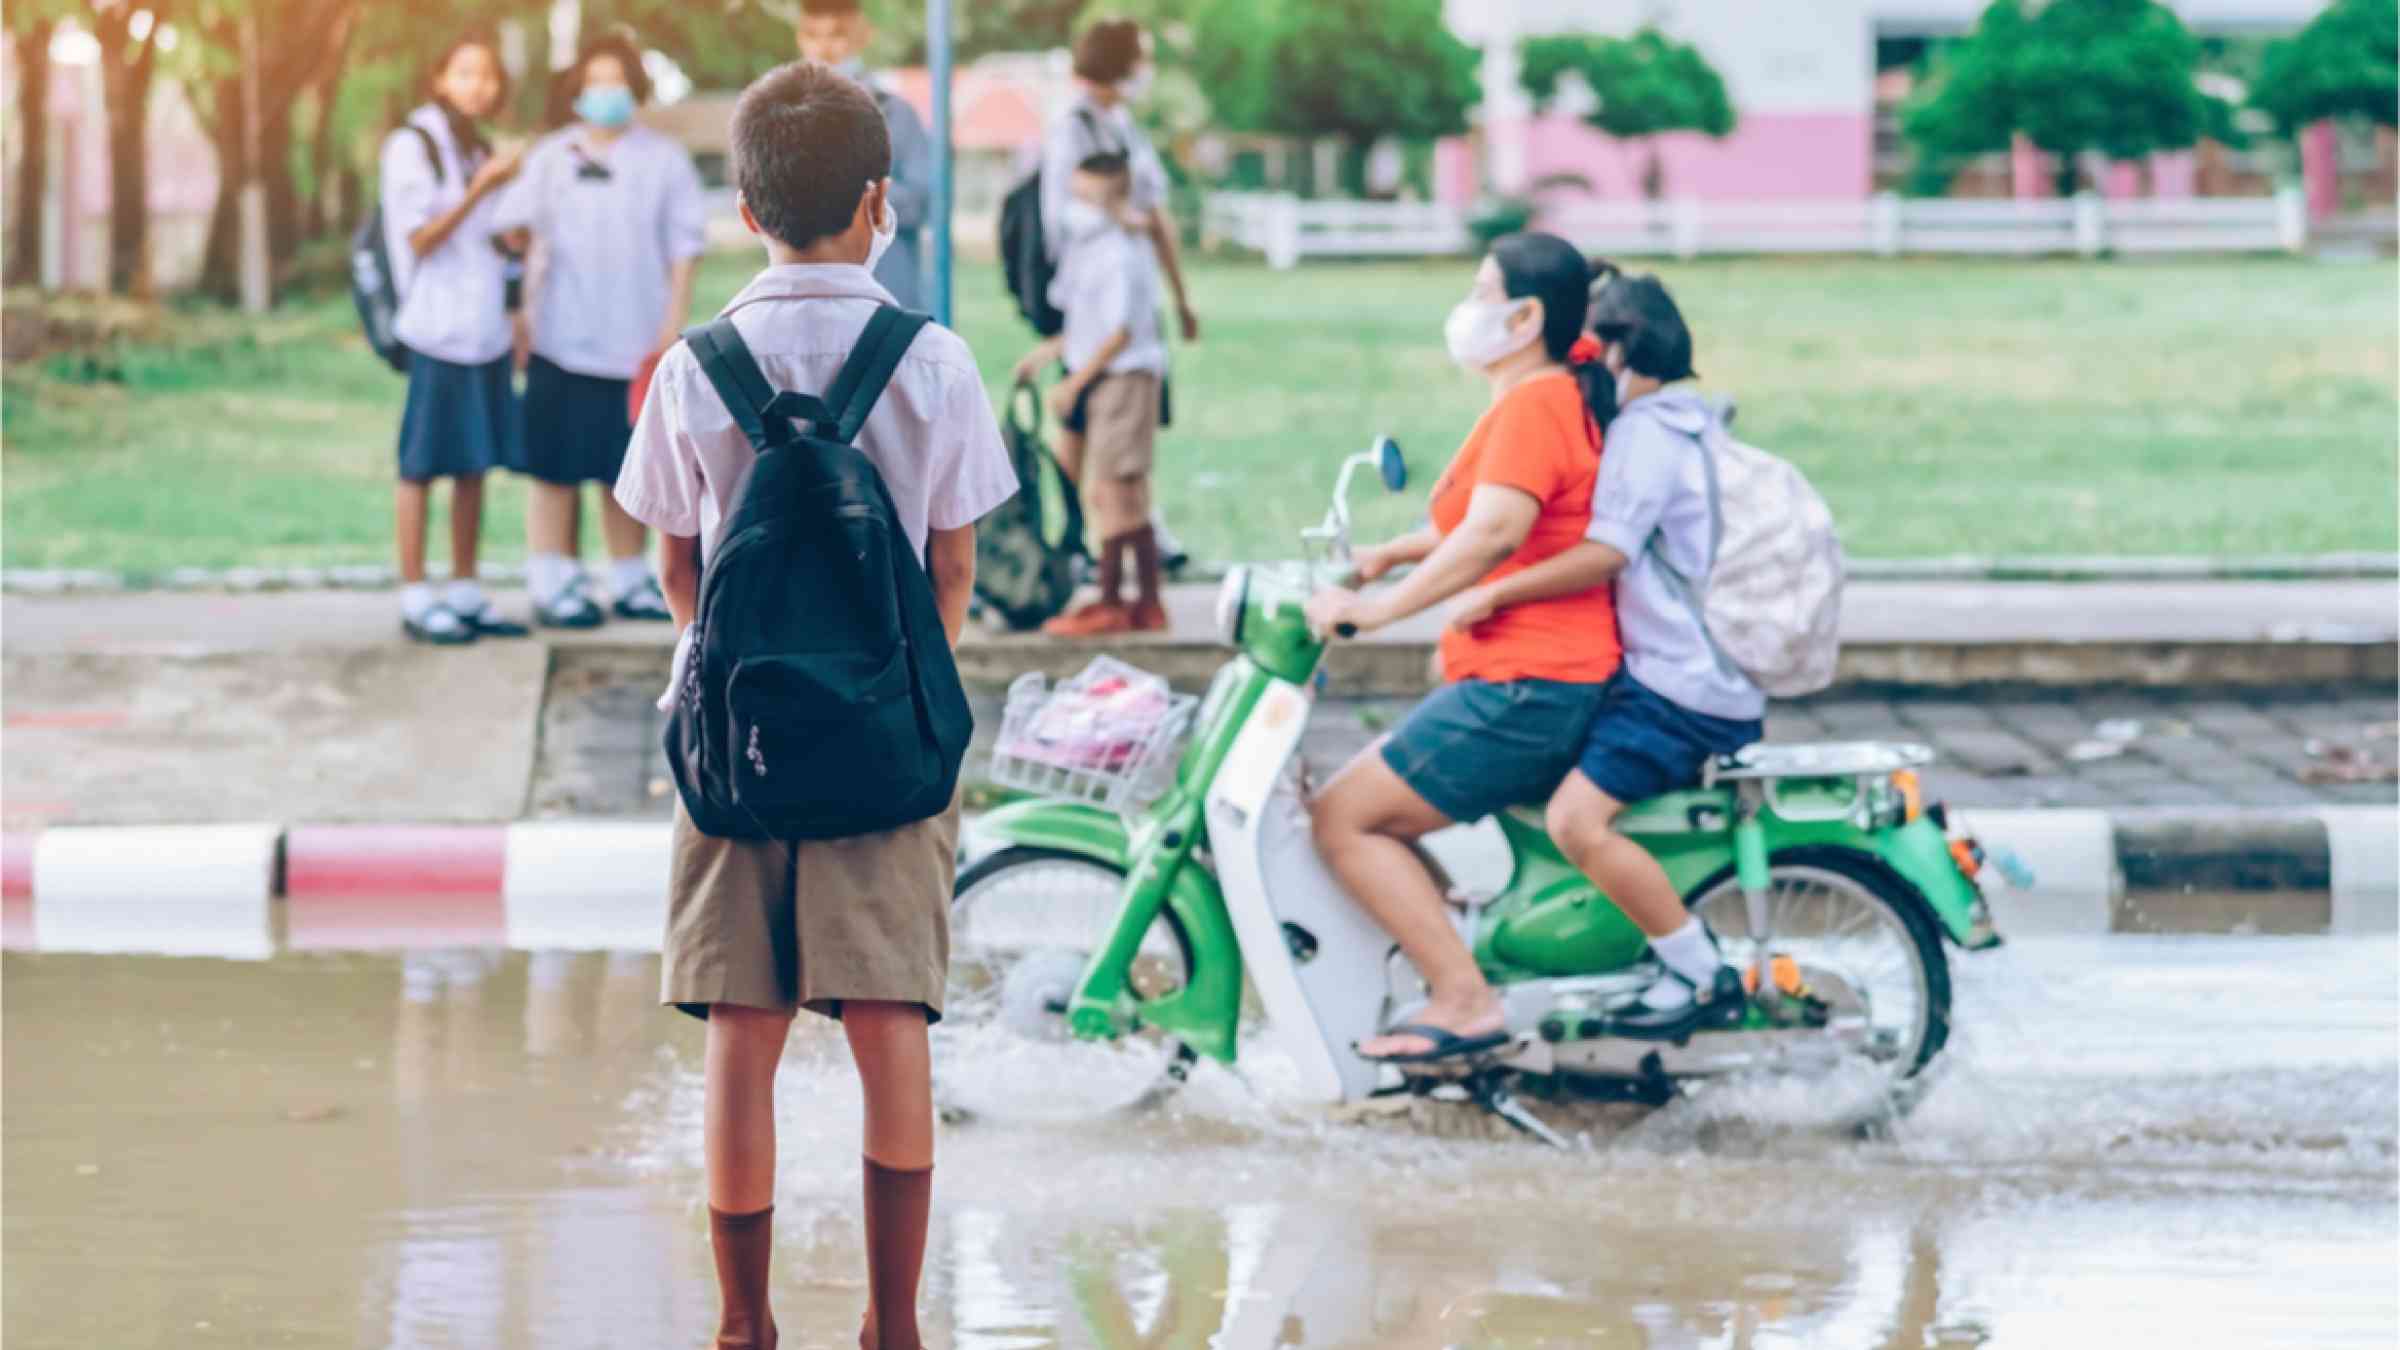 This image shows students wearing masks and a motorcycle driving through flooded streets.